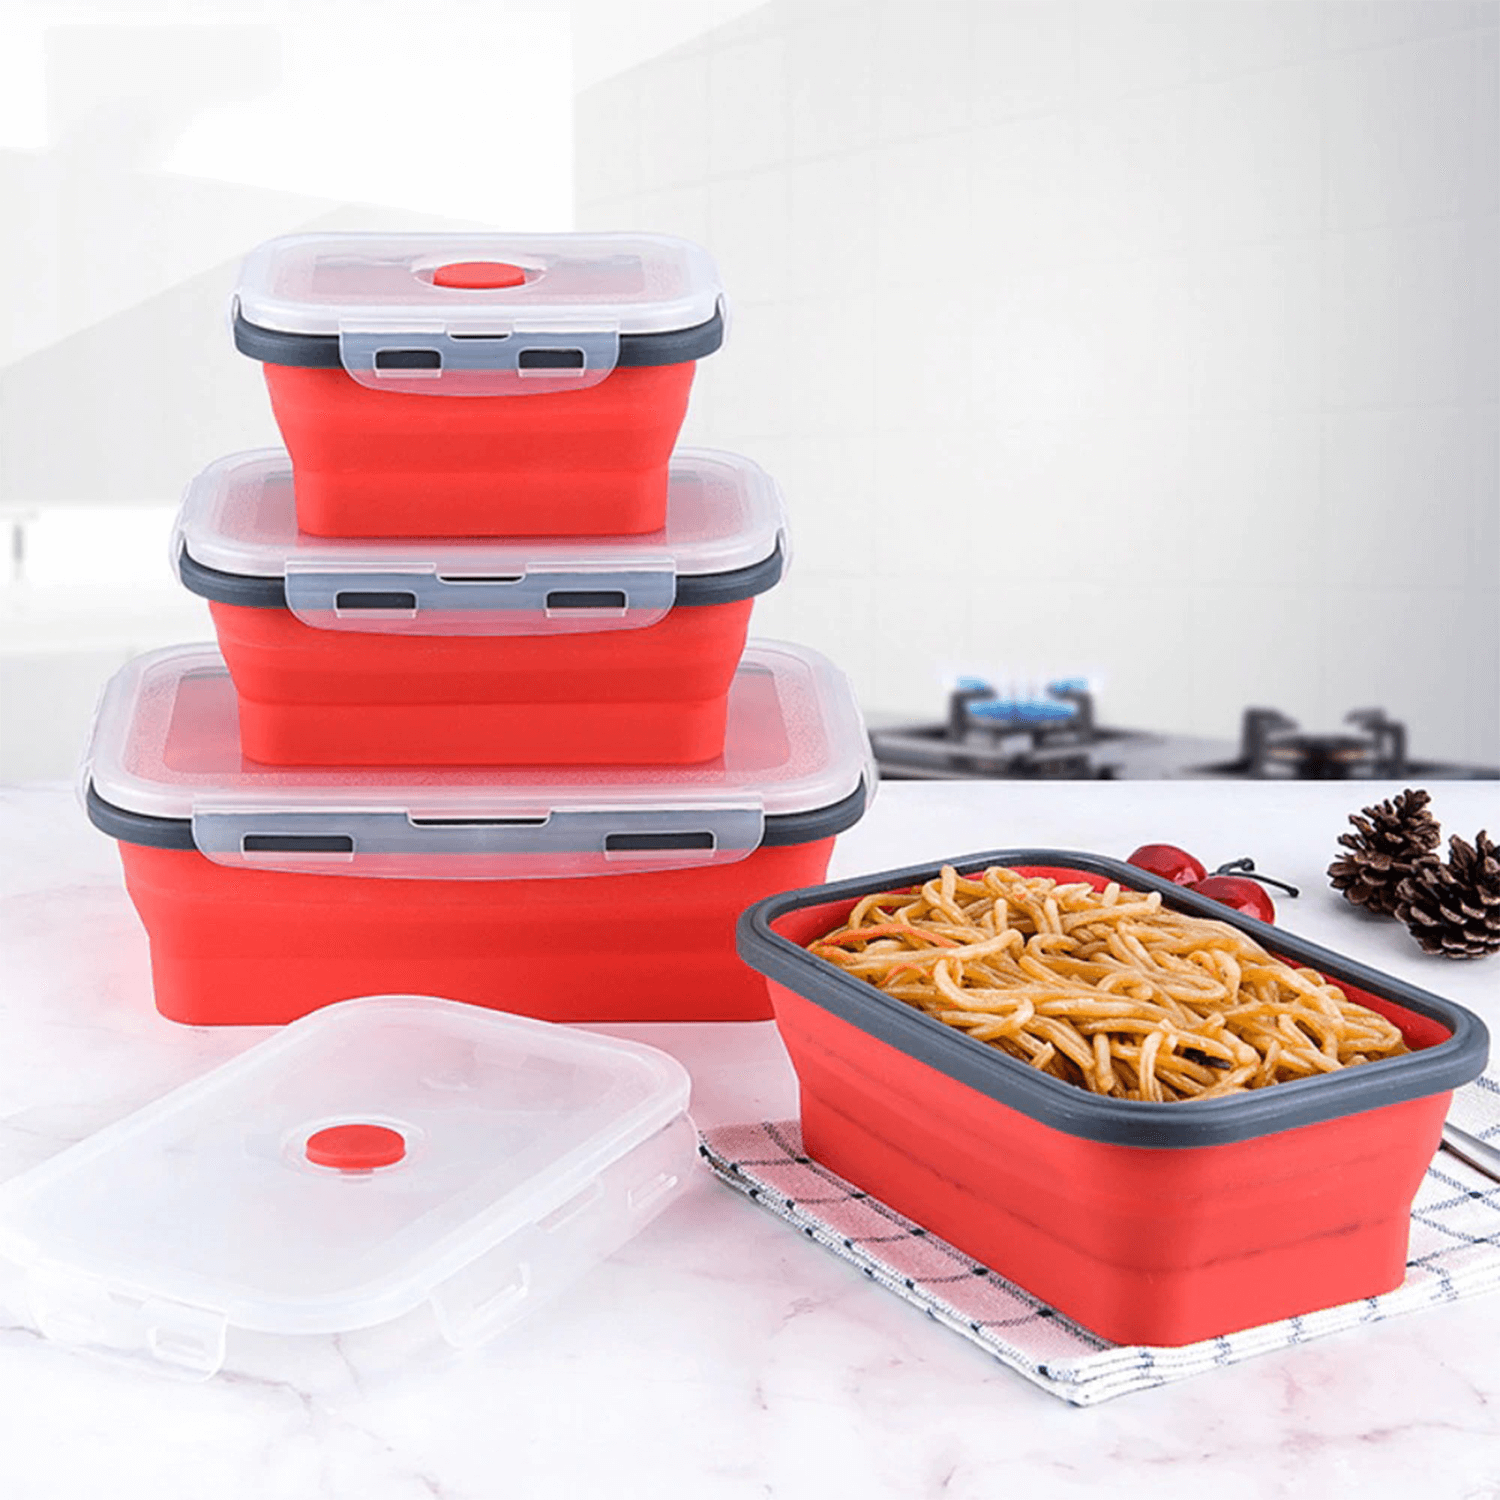 The Tiffin Project Reusable To-Go Containers - We Hate To Waste